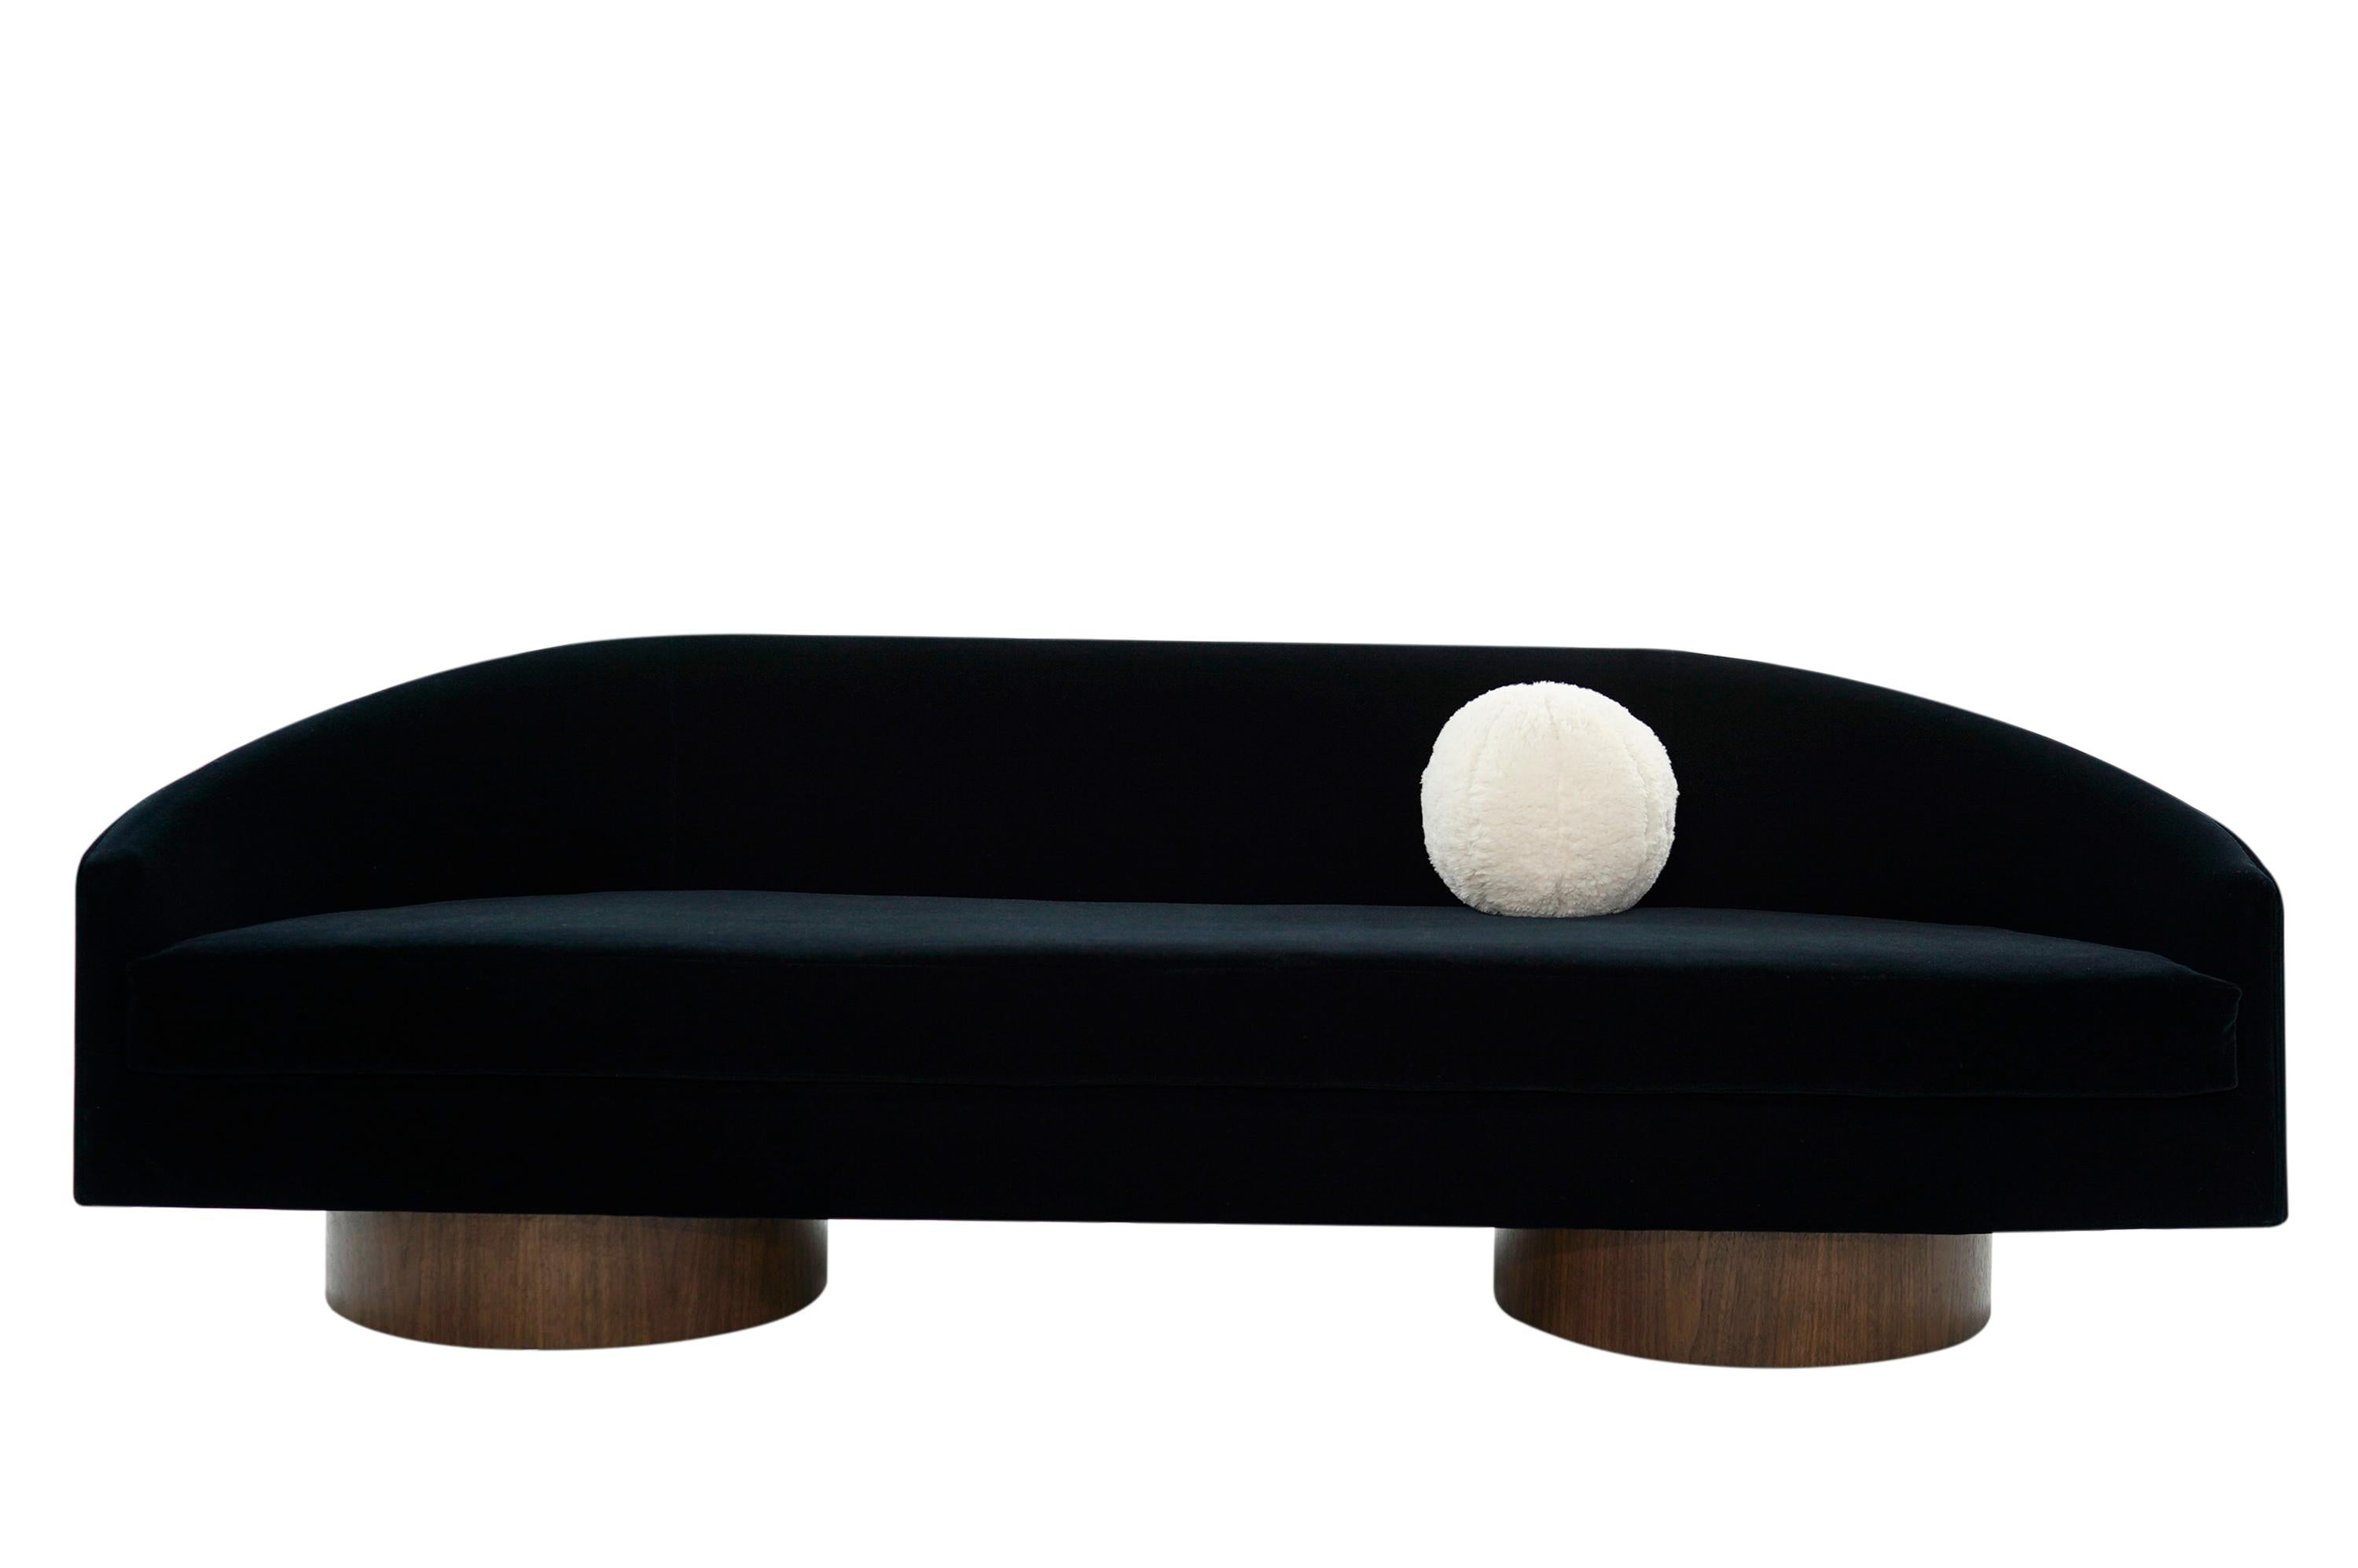 Rarely seen cloud sofa designed by Adrian Pearsall for Craft Associates on walnut pedestal bases. Newly upholstered in navy blue velvet mohair.